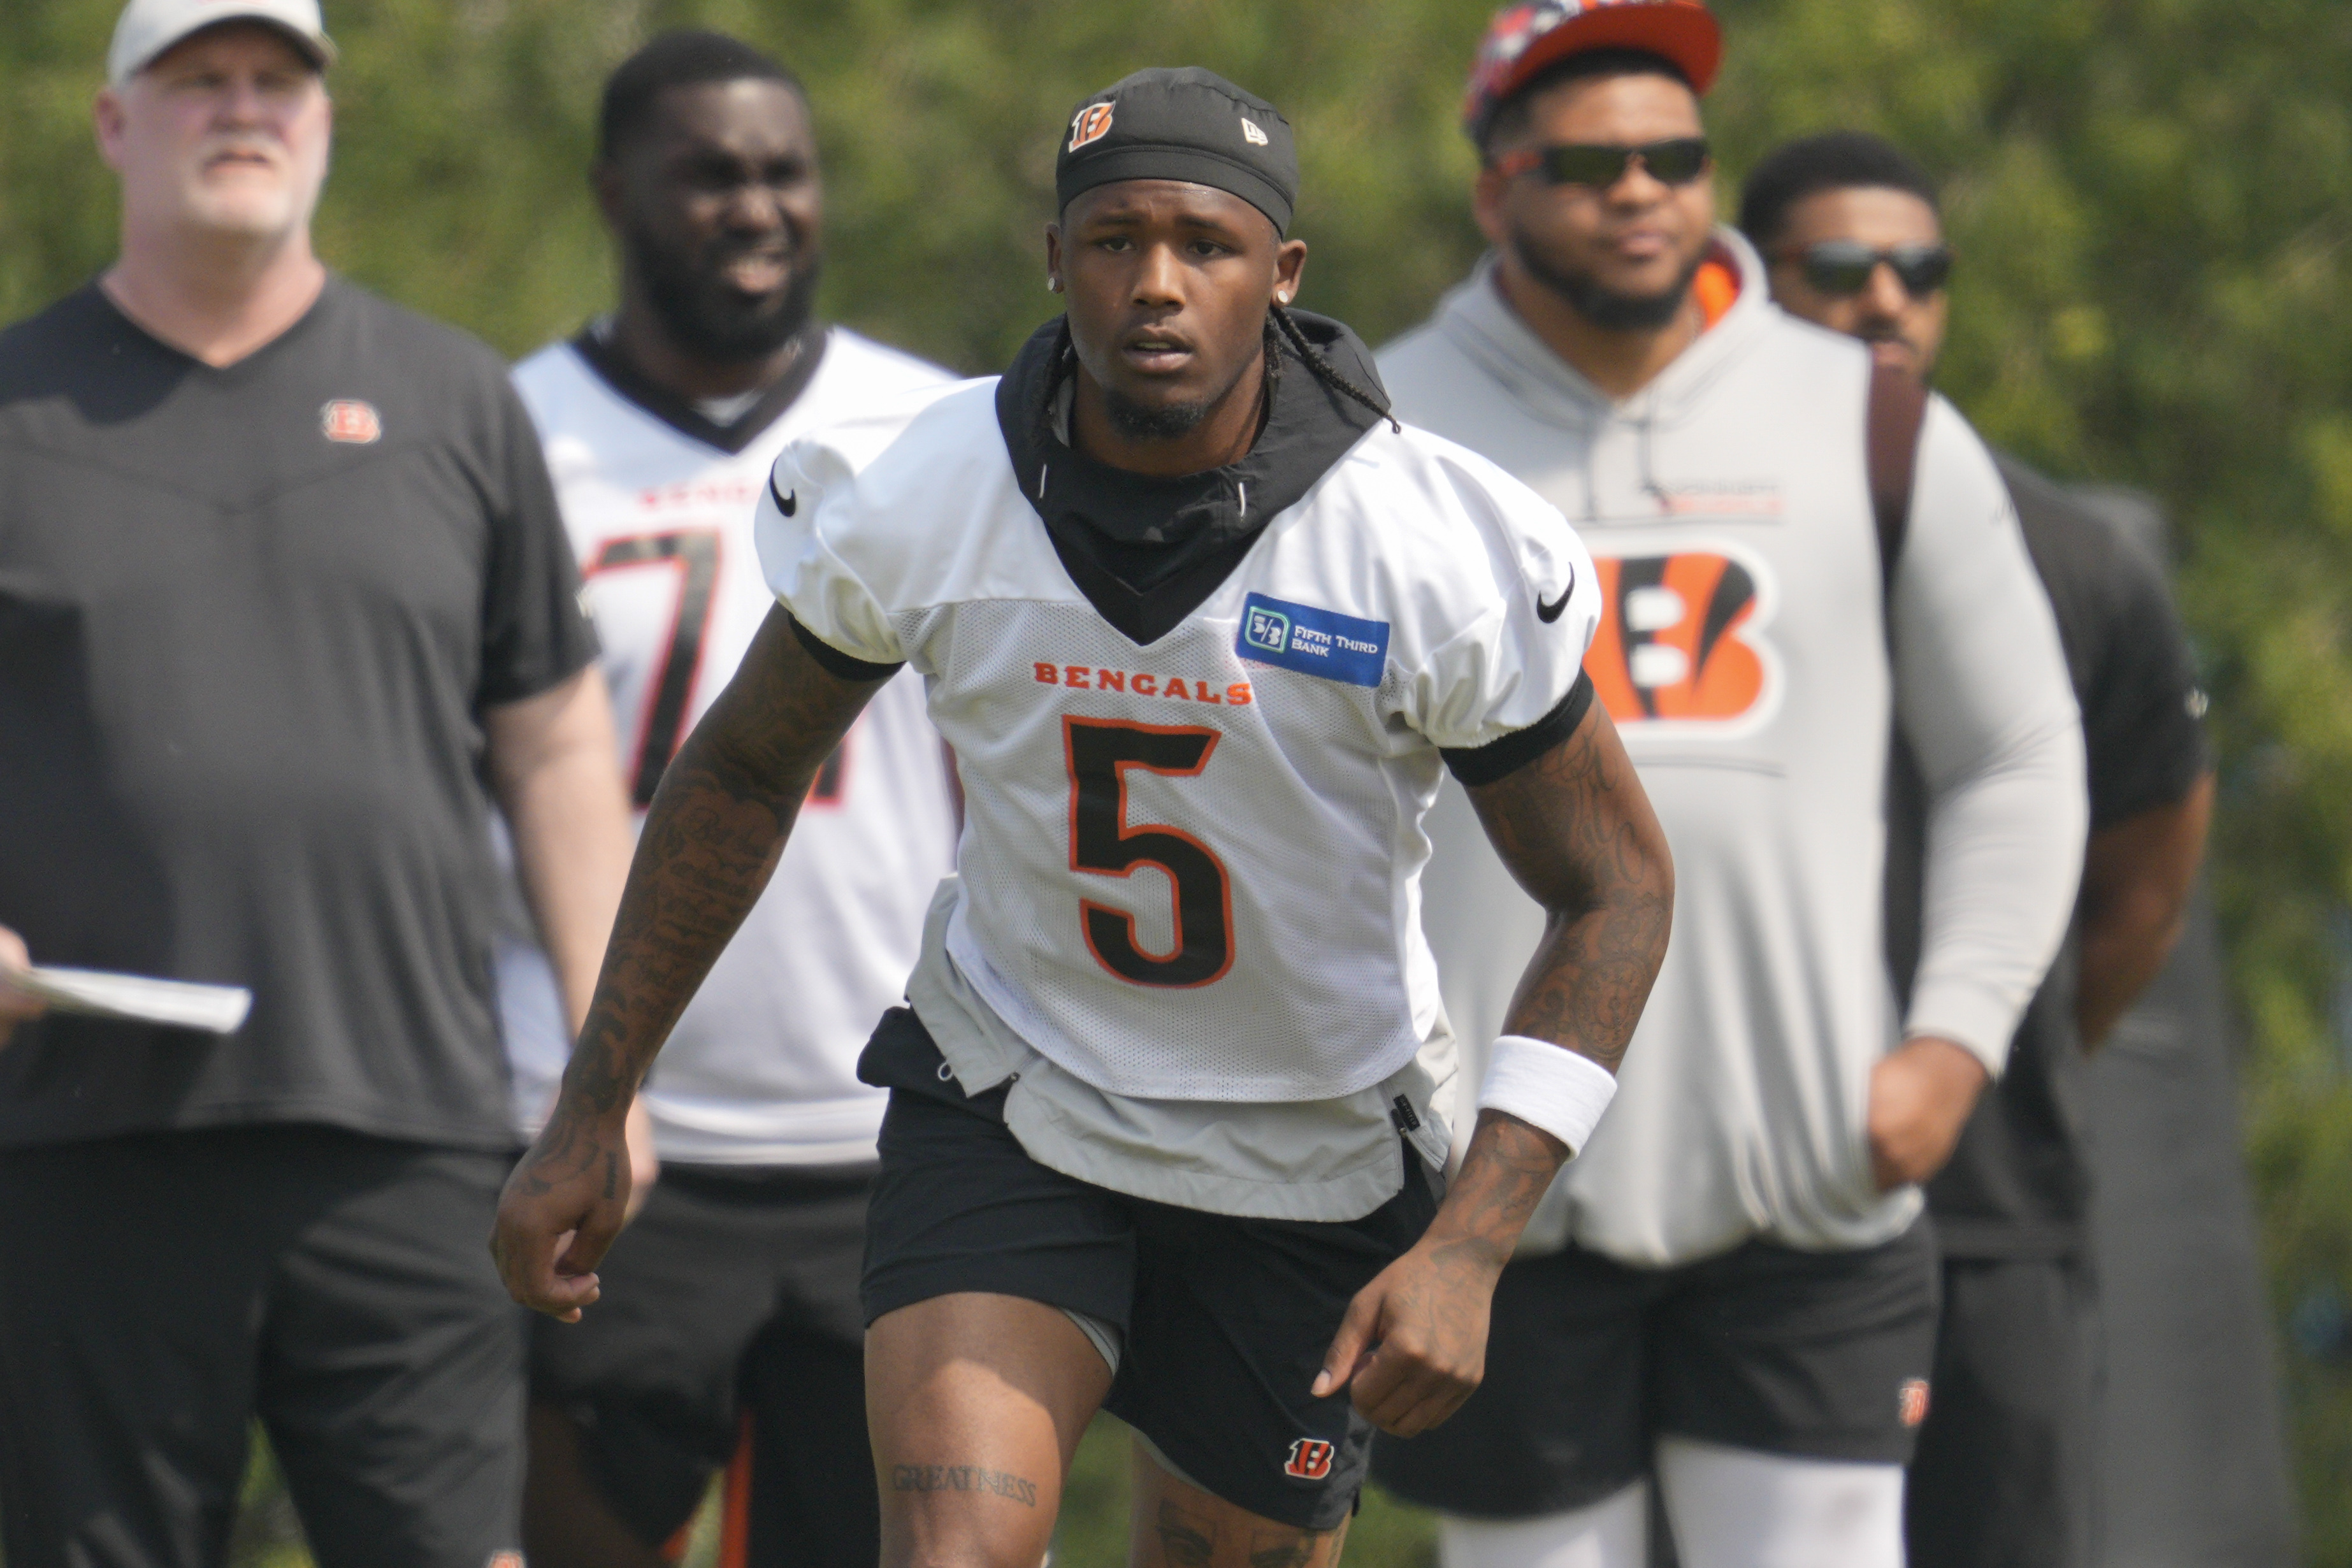 Bengals: Tee Higgins' 5-word statement on contract situation